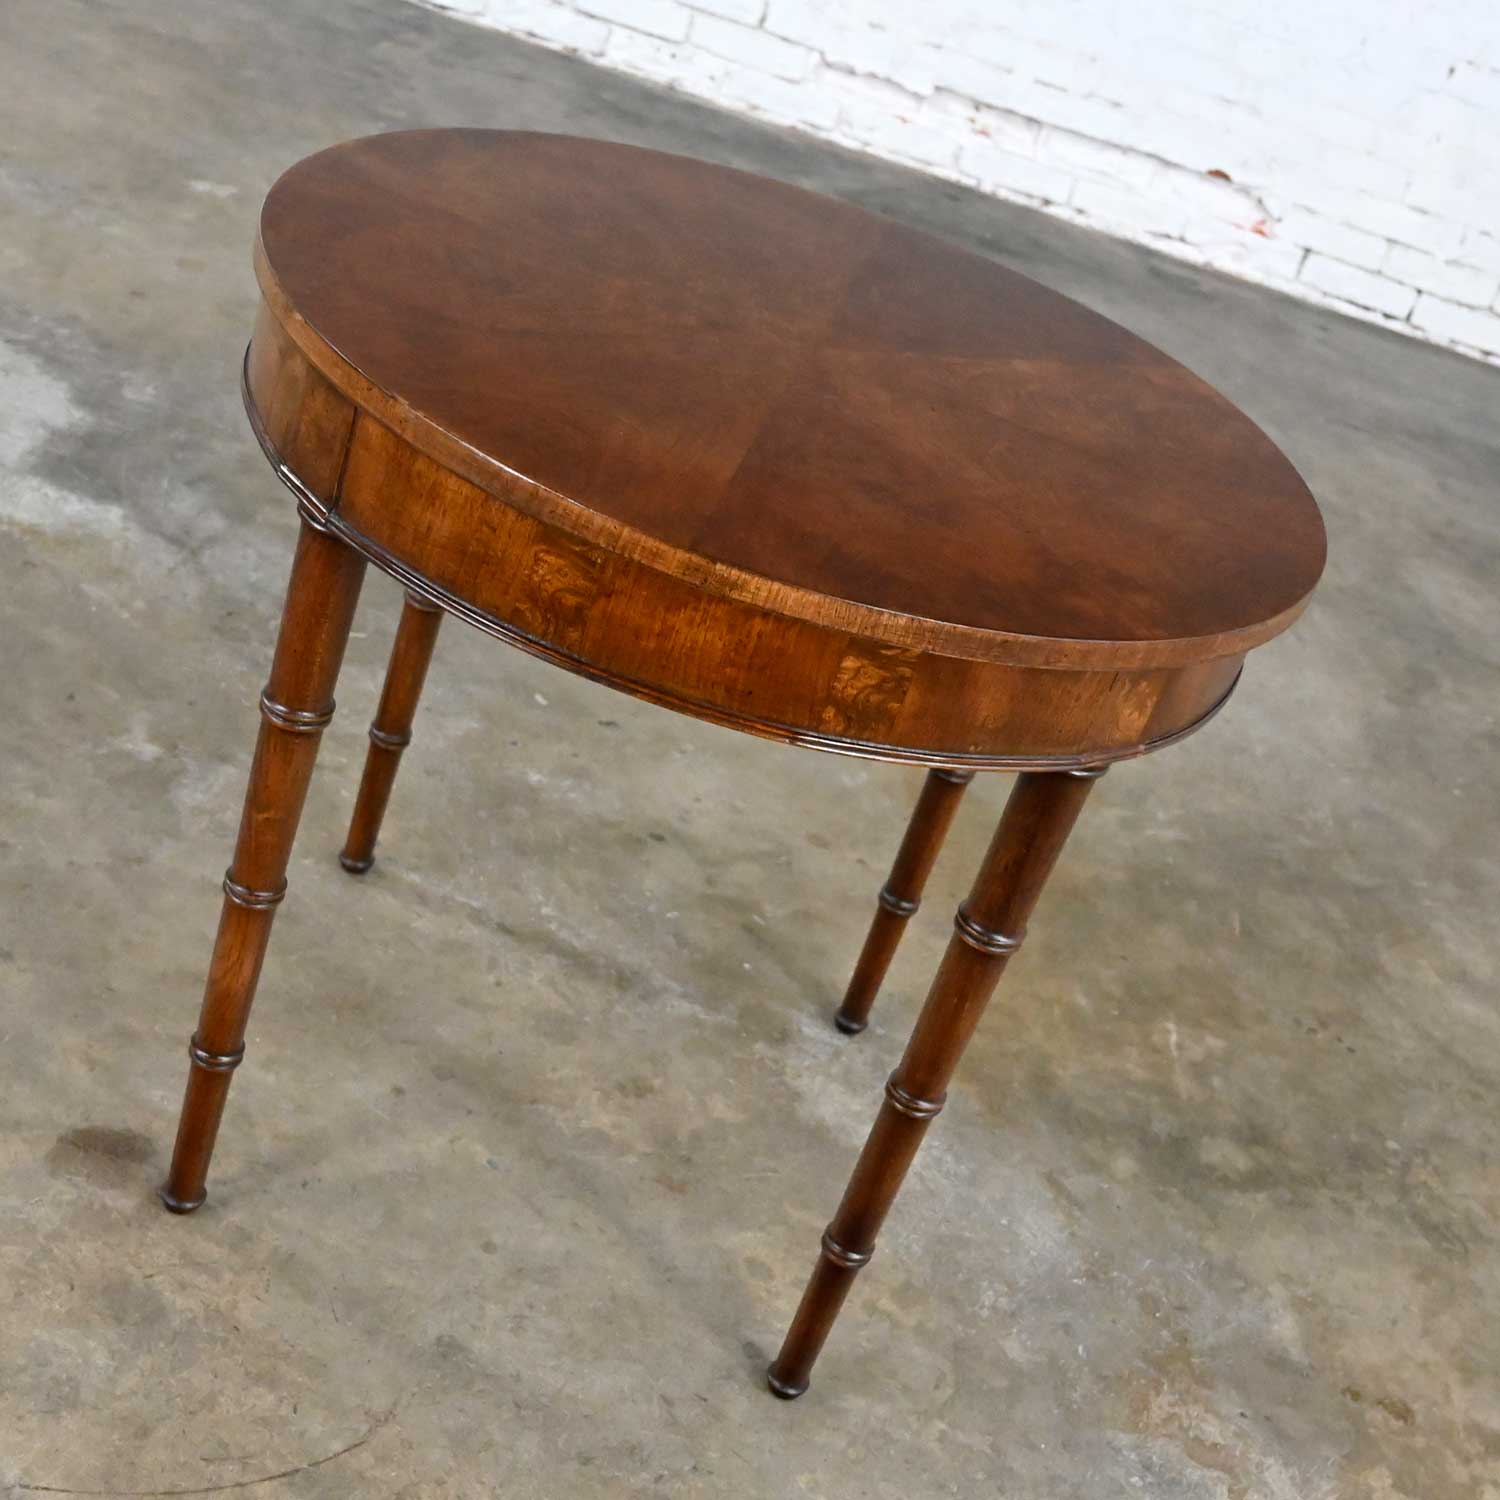 Vintage Campaign Style Round Walton Accent or Lamp Table Faux Bamboo Legs by Fine Arts Furniture Co